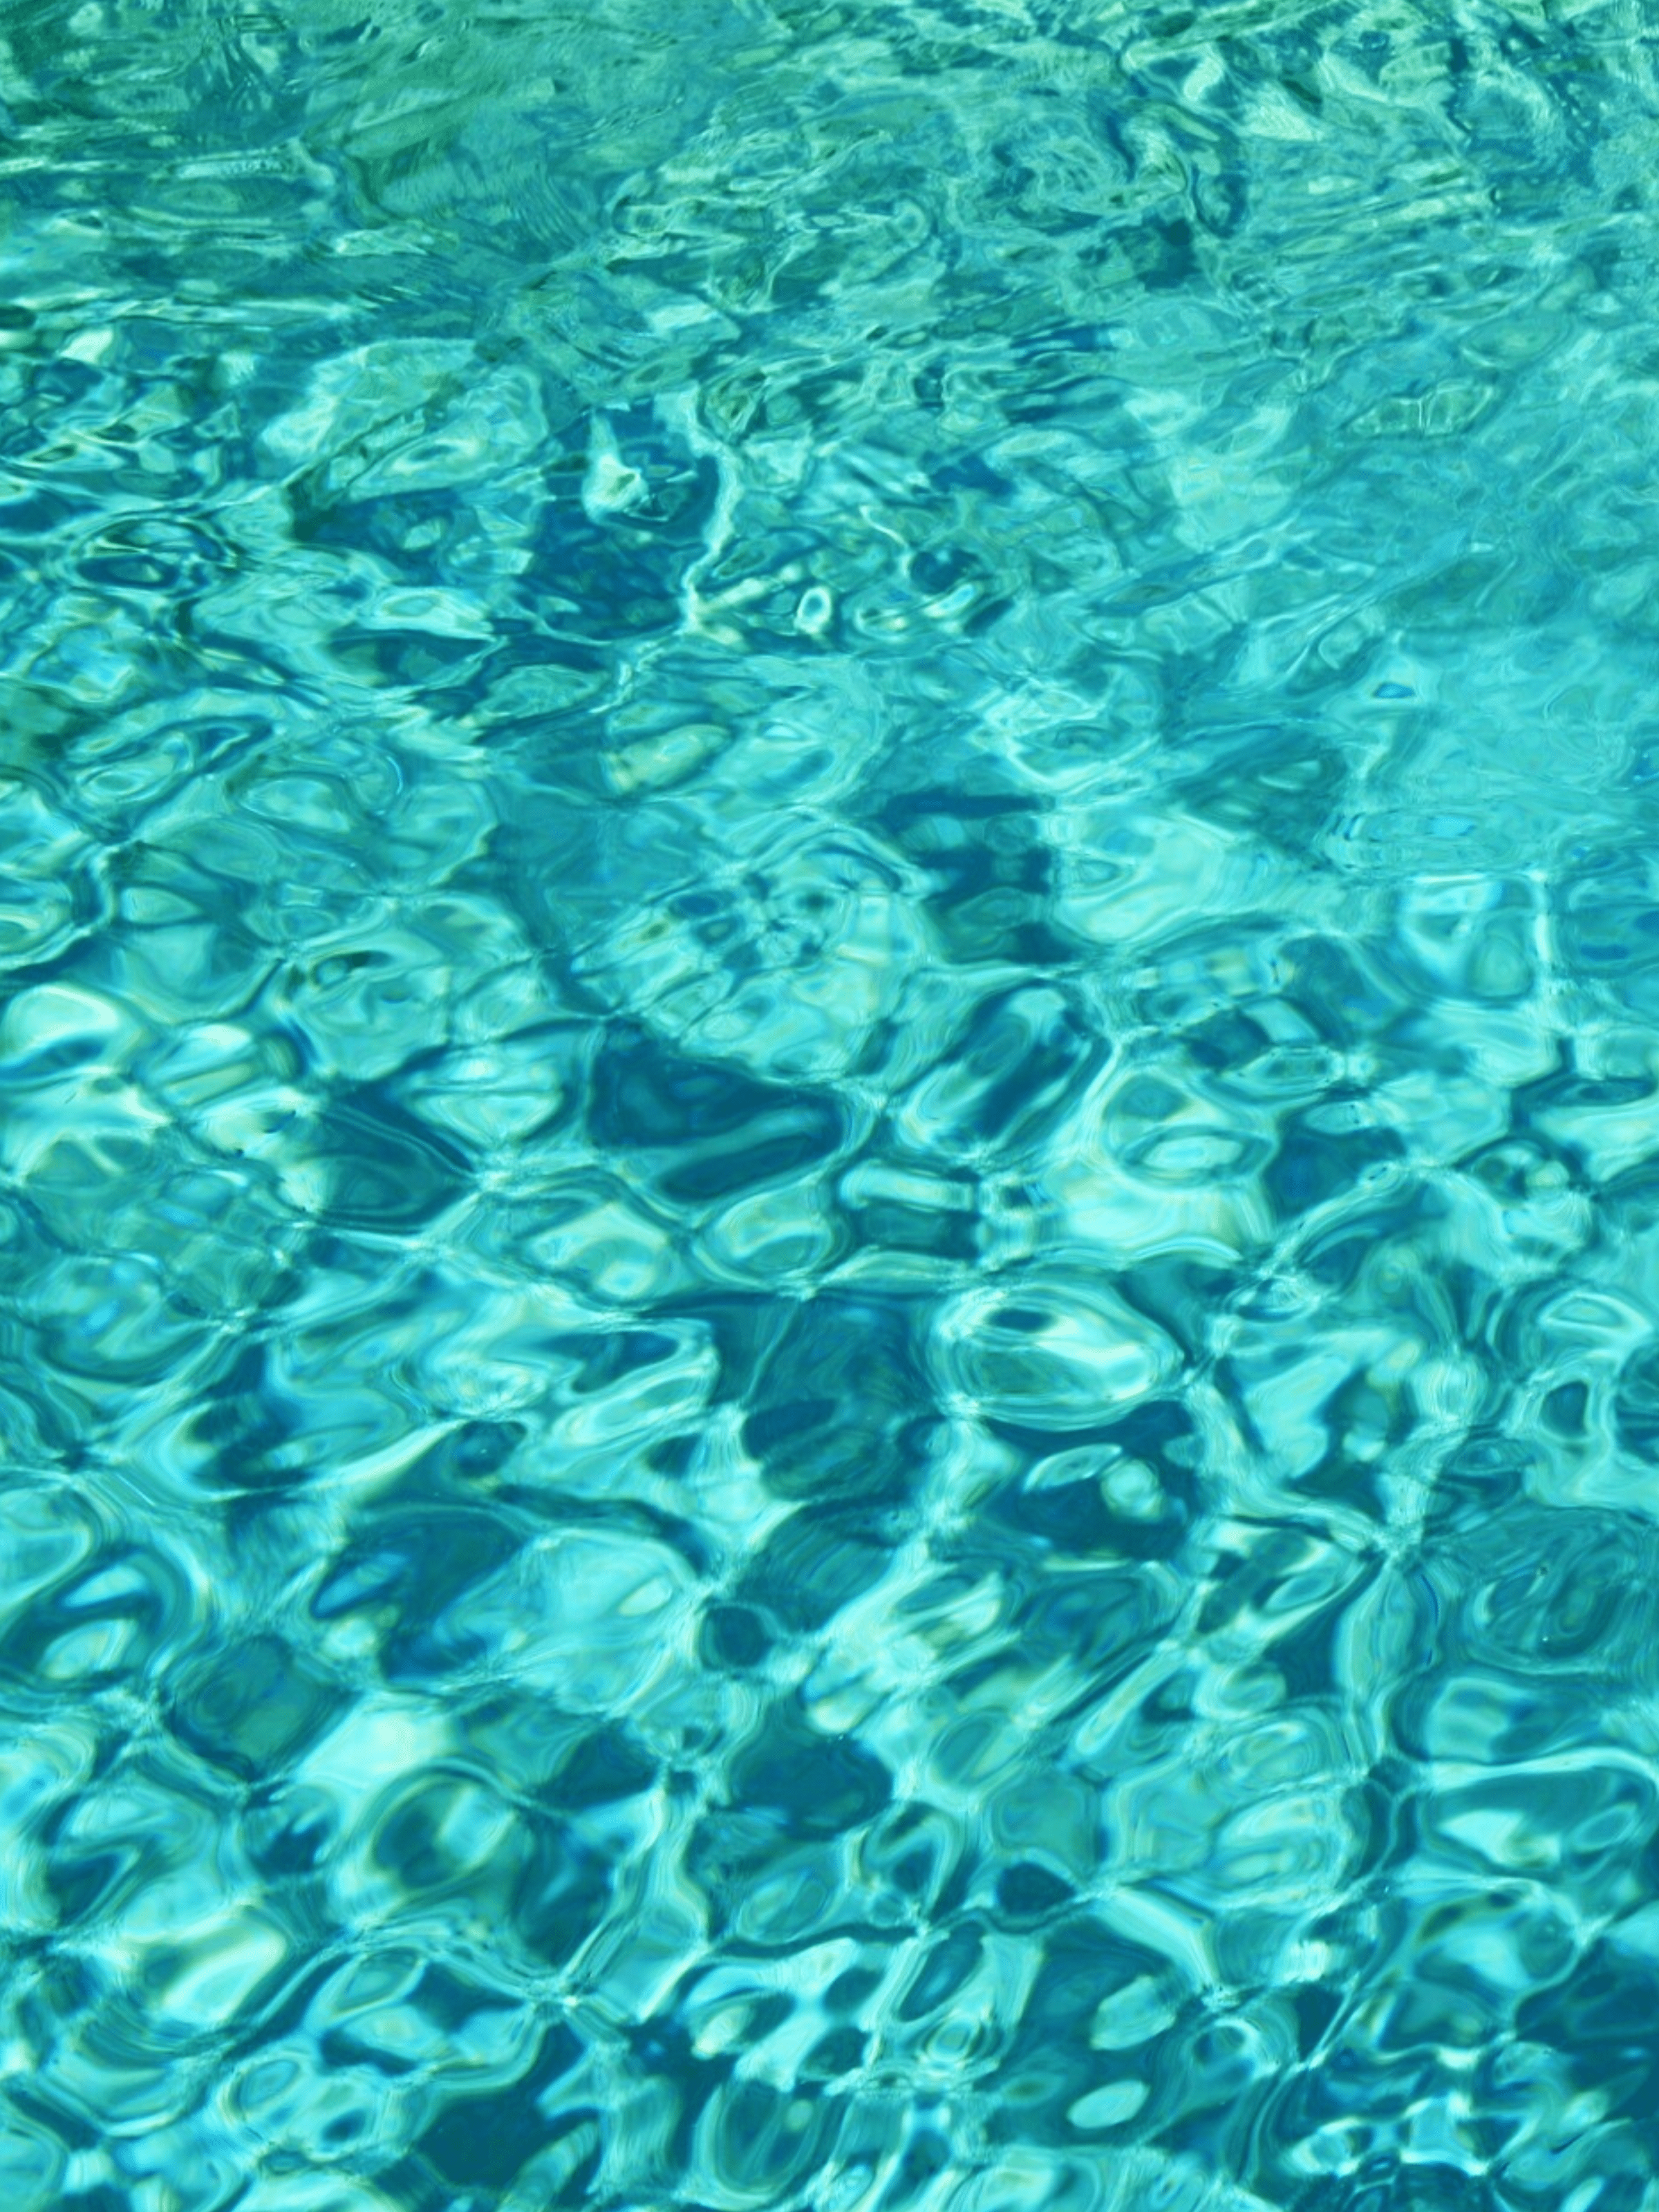 A close up of the water in a pool with light reflecting off the surface. - Aqua